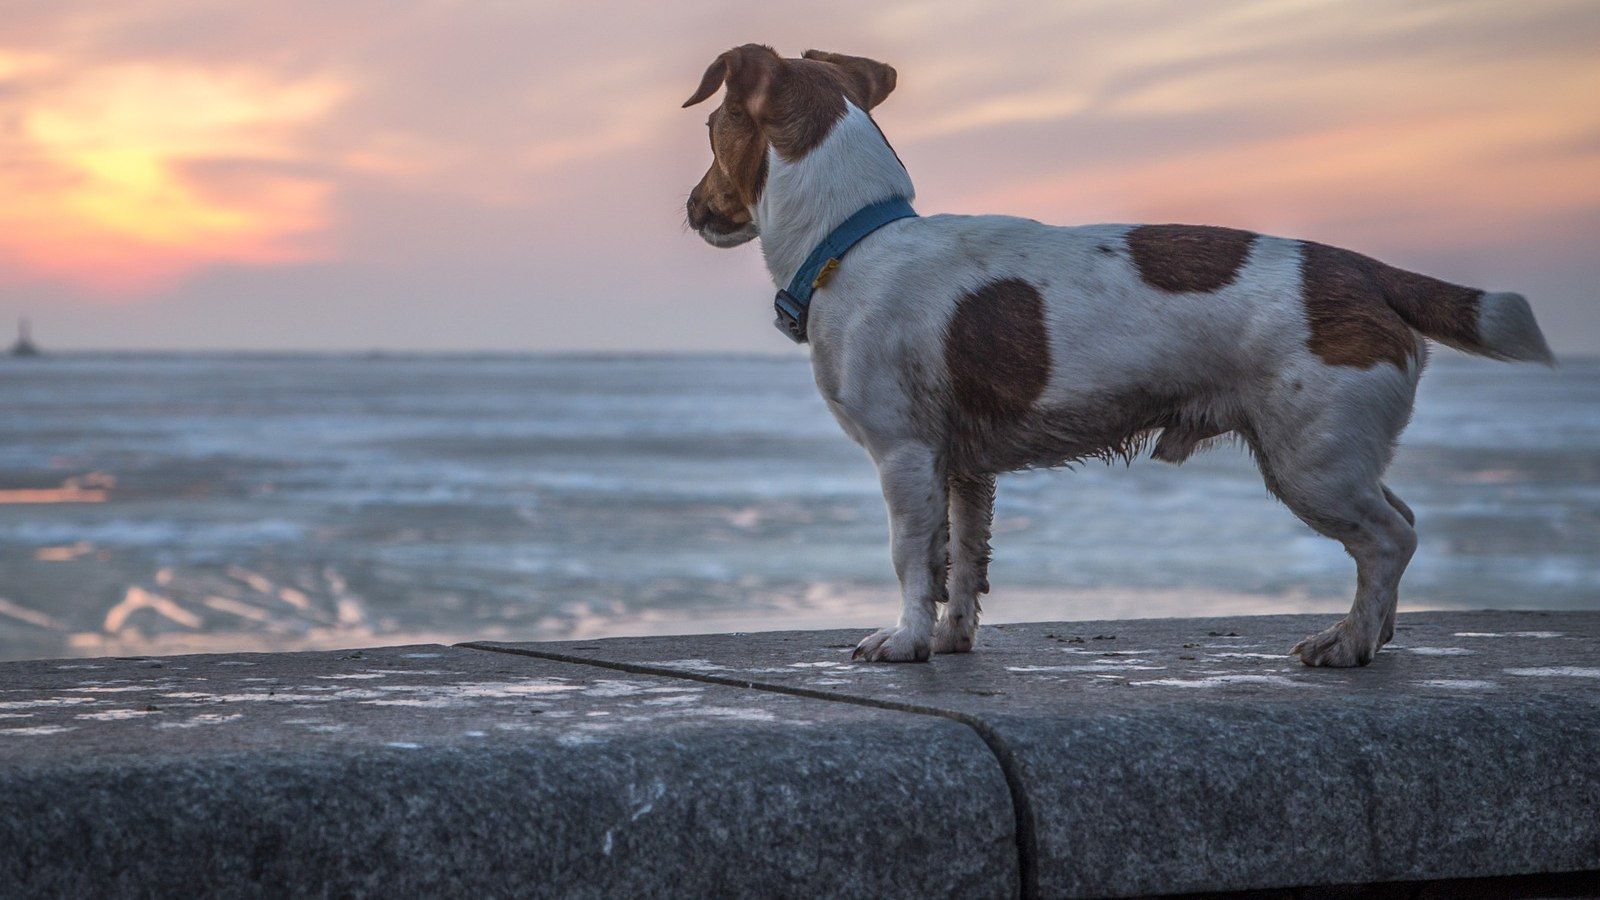 A brown and white dog standing on a wall at the beach watching the waves at sunset banner image